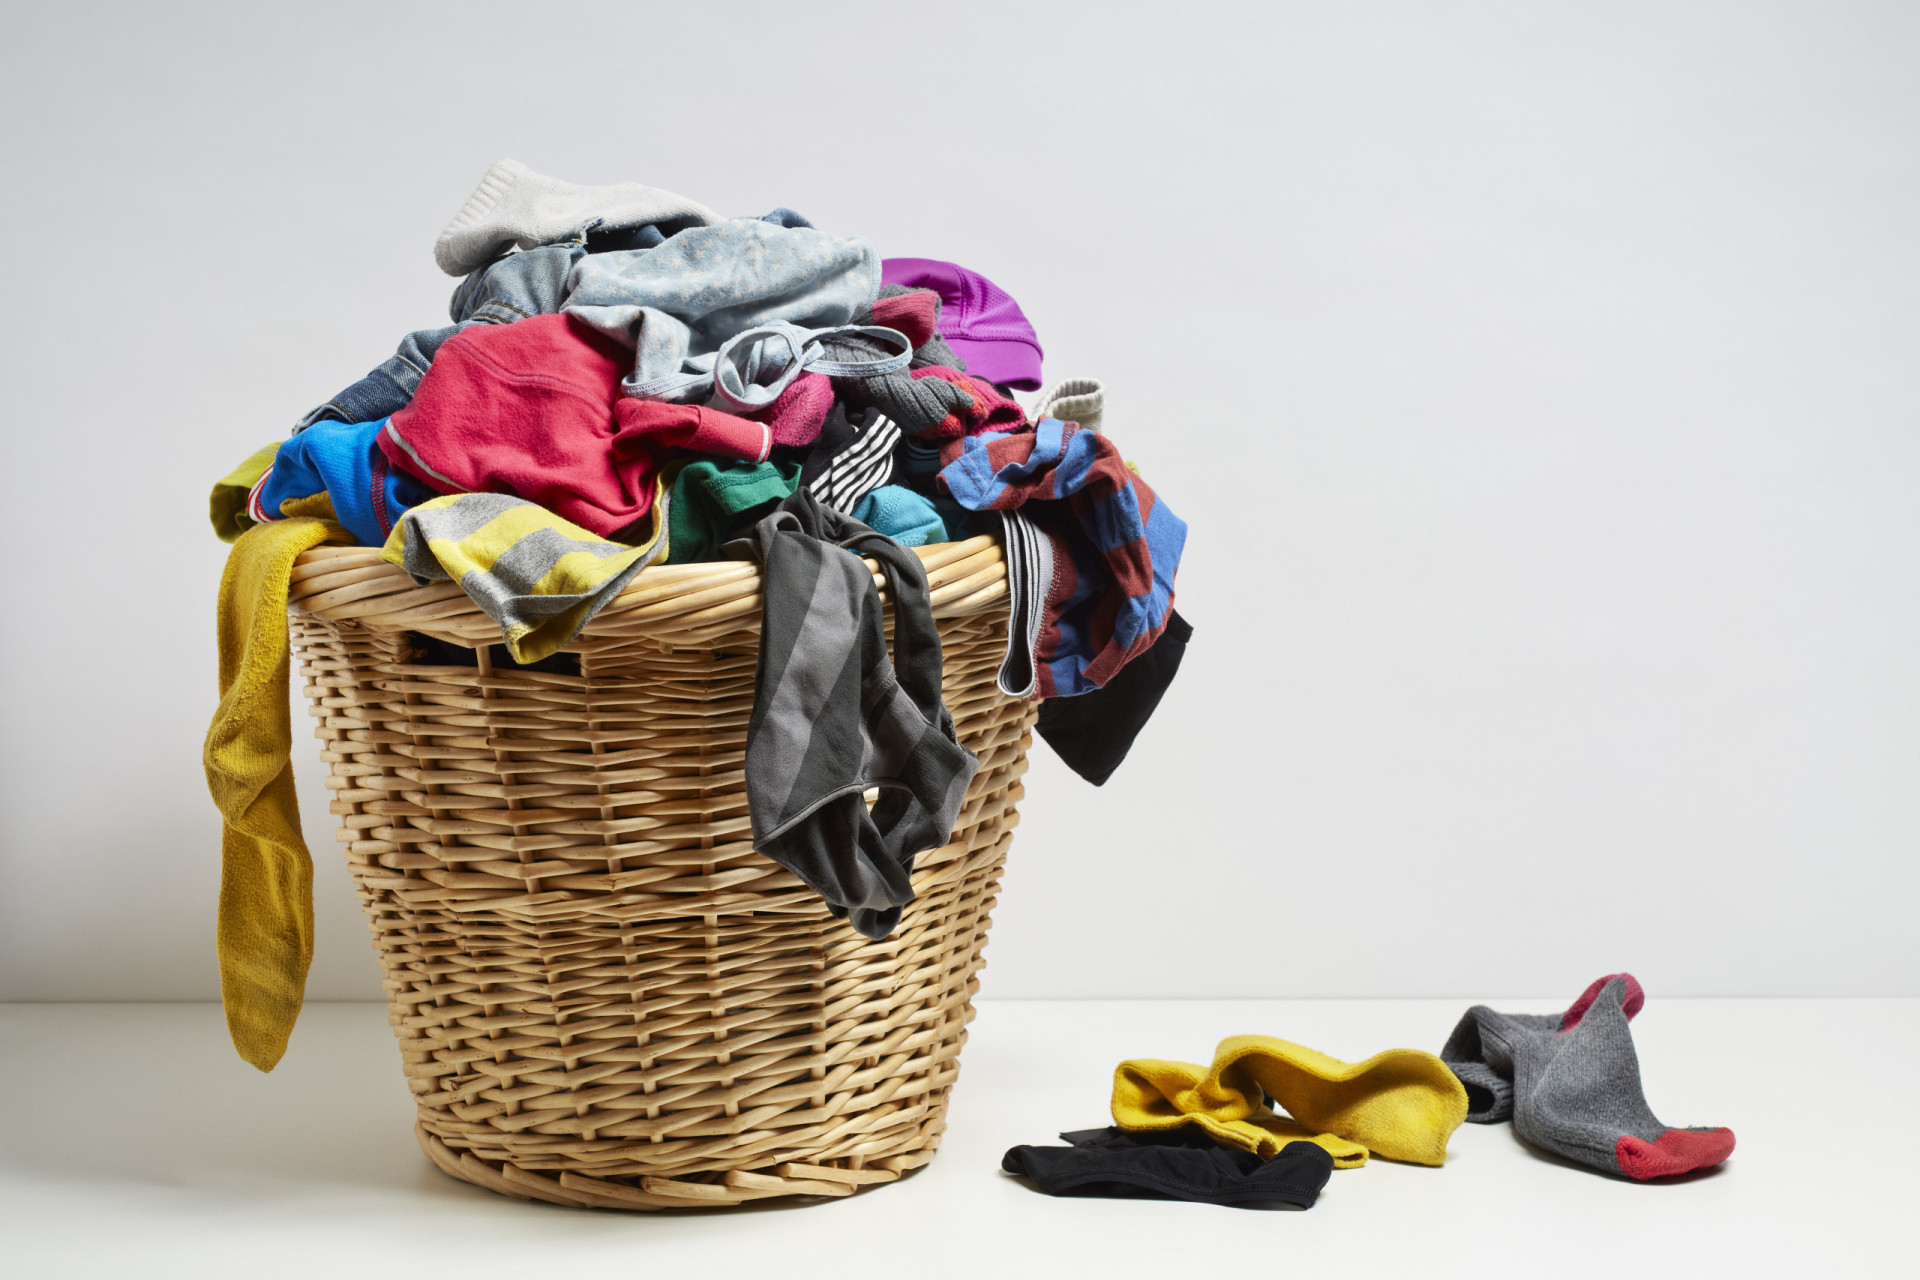 <p>This really isn't an excuse if you're an adult and you do your own laundry. If this happens for real, maybe you should rethink your priorities in life.</p><p><a href="https://www.msn.com/en-us/community/channel/vid-7xx8mnucu55yw63we9va2gwr7uihbxwc68fxqp25x6tg4ftibpra?cvid=94631541bc0f4f89bfd59158d696ad7e">Follow us and access great exclusive content every day</a></p>